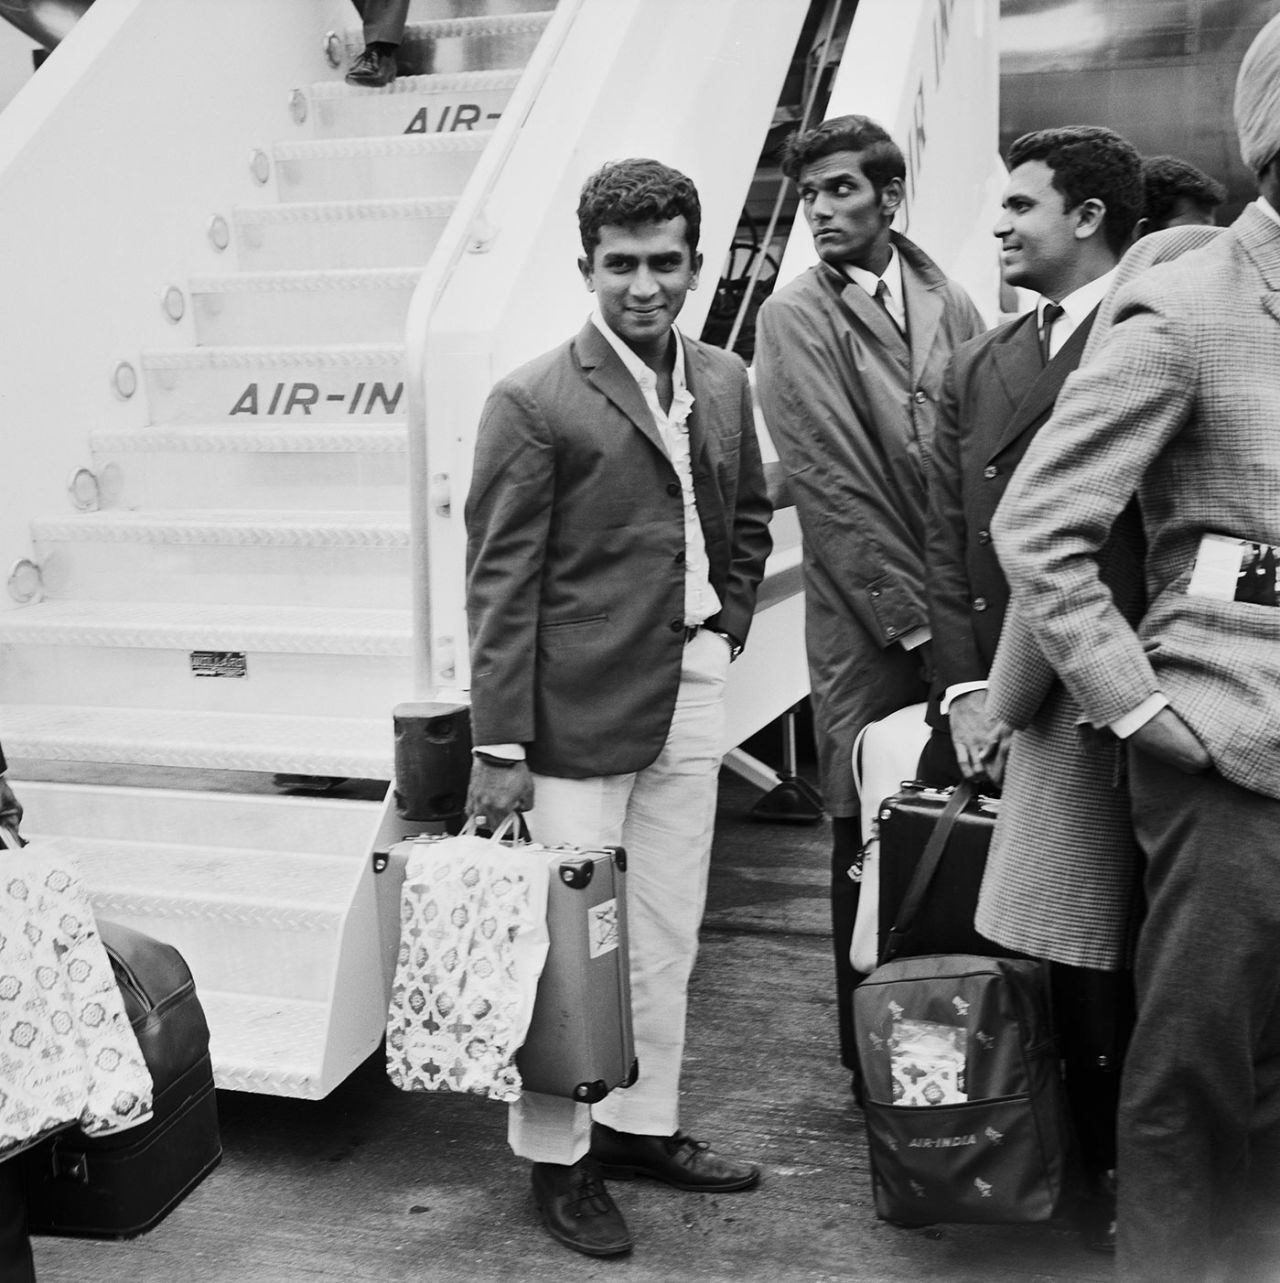 Indian Test cricketers get off the plane at the start of the tour of England. Sunil Gavaskar is centre. London, June 18, 1971